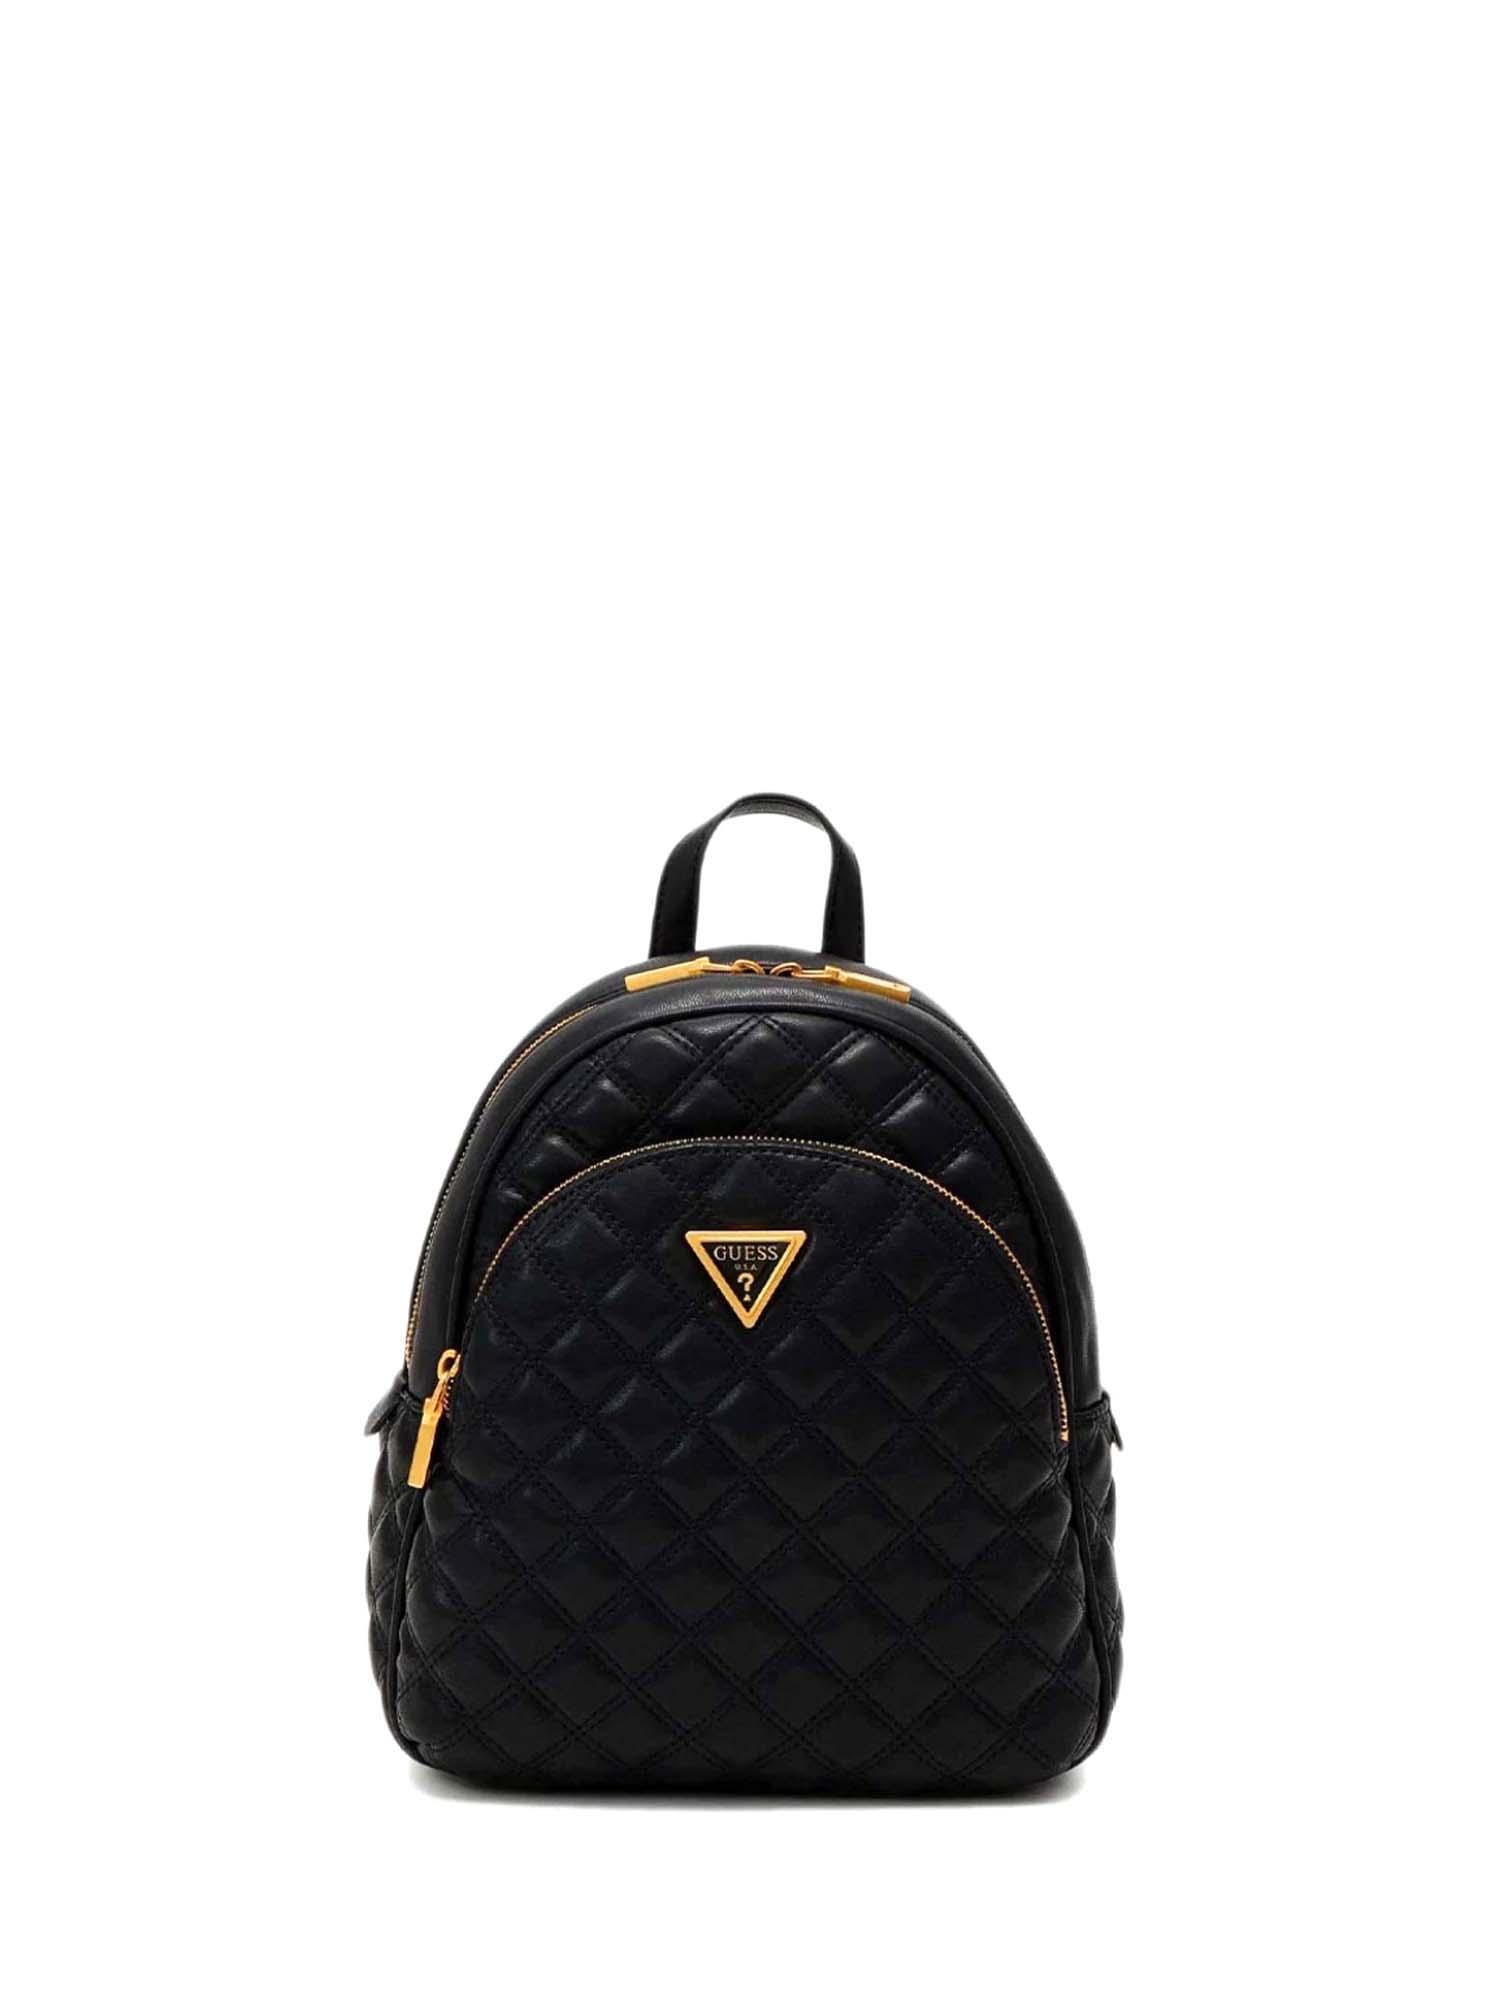 GIULLY BACKPACK ΤΣΑΝΤΑ ΓΥΝΑΙΚΕΙΟ | BLACK